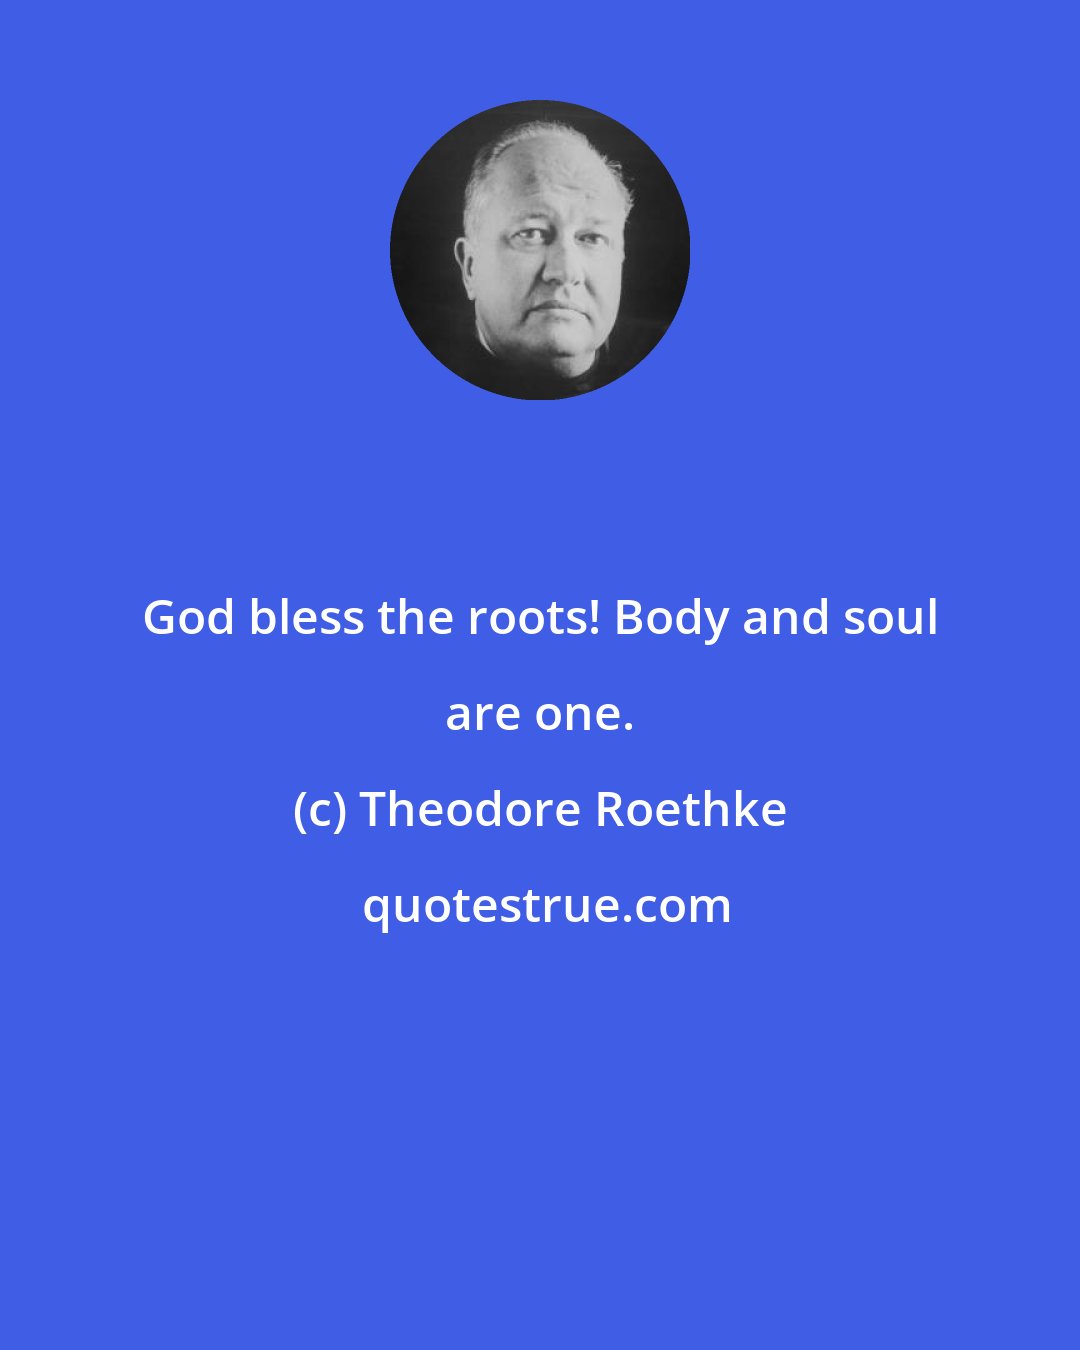 Theodore Roethke: God bless the roots! Body and soul are one.